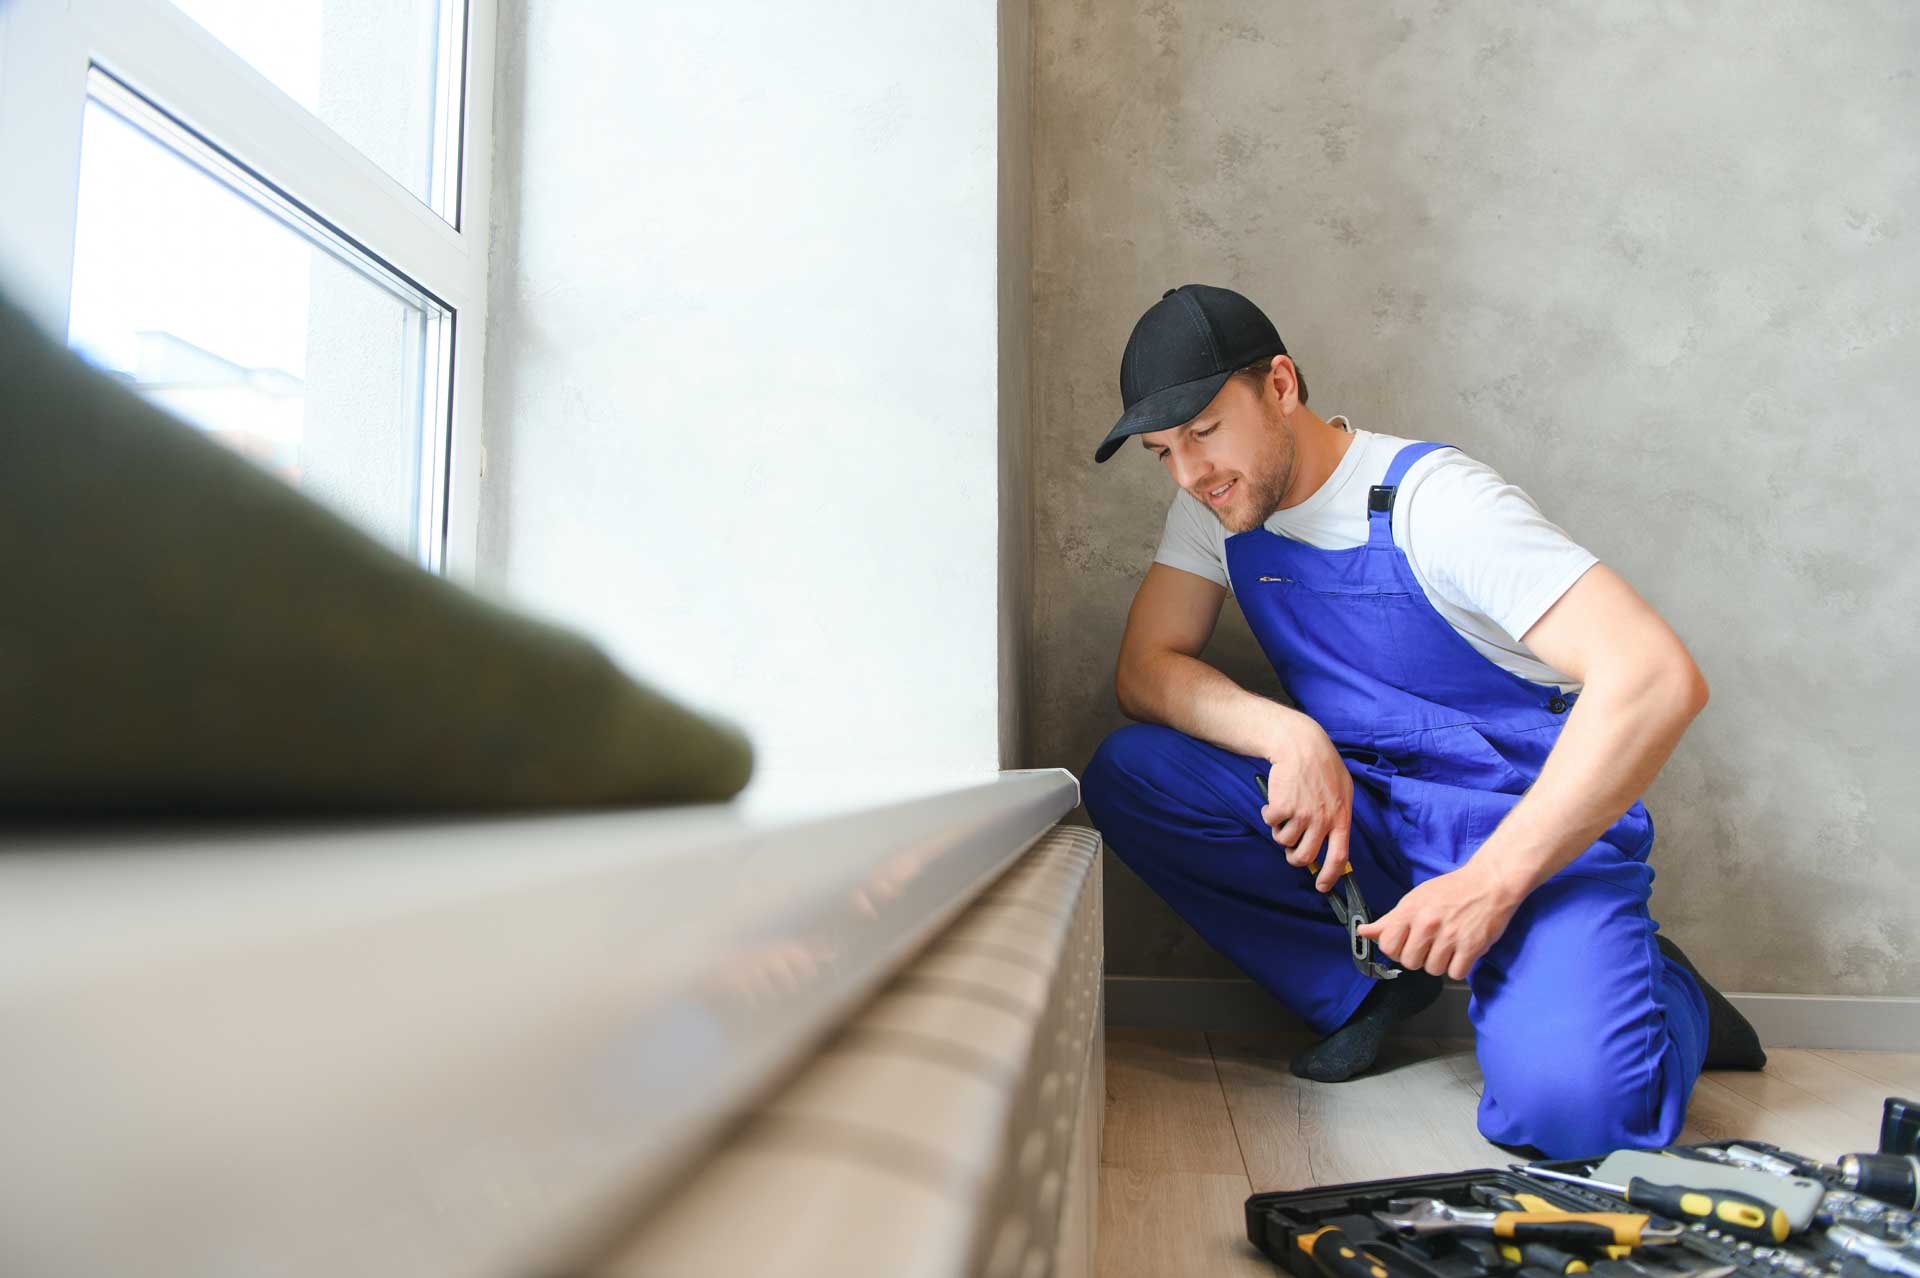 A worker in a blue uniform and cap installs or repairs a gas line in a room with gray walls and a large window.